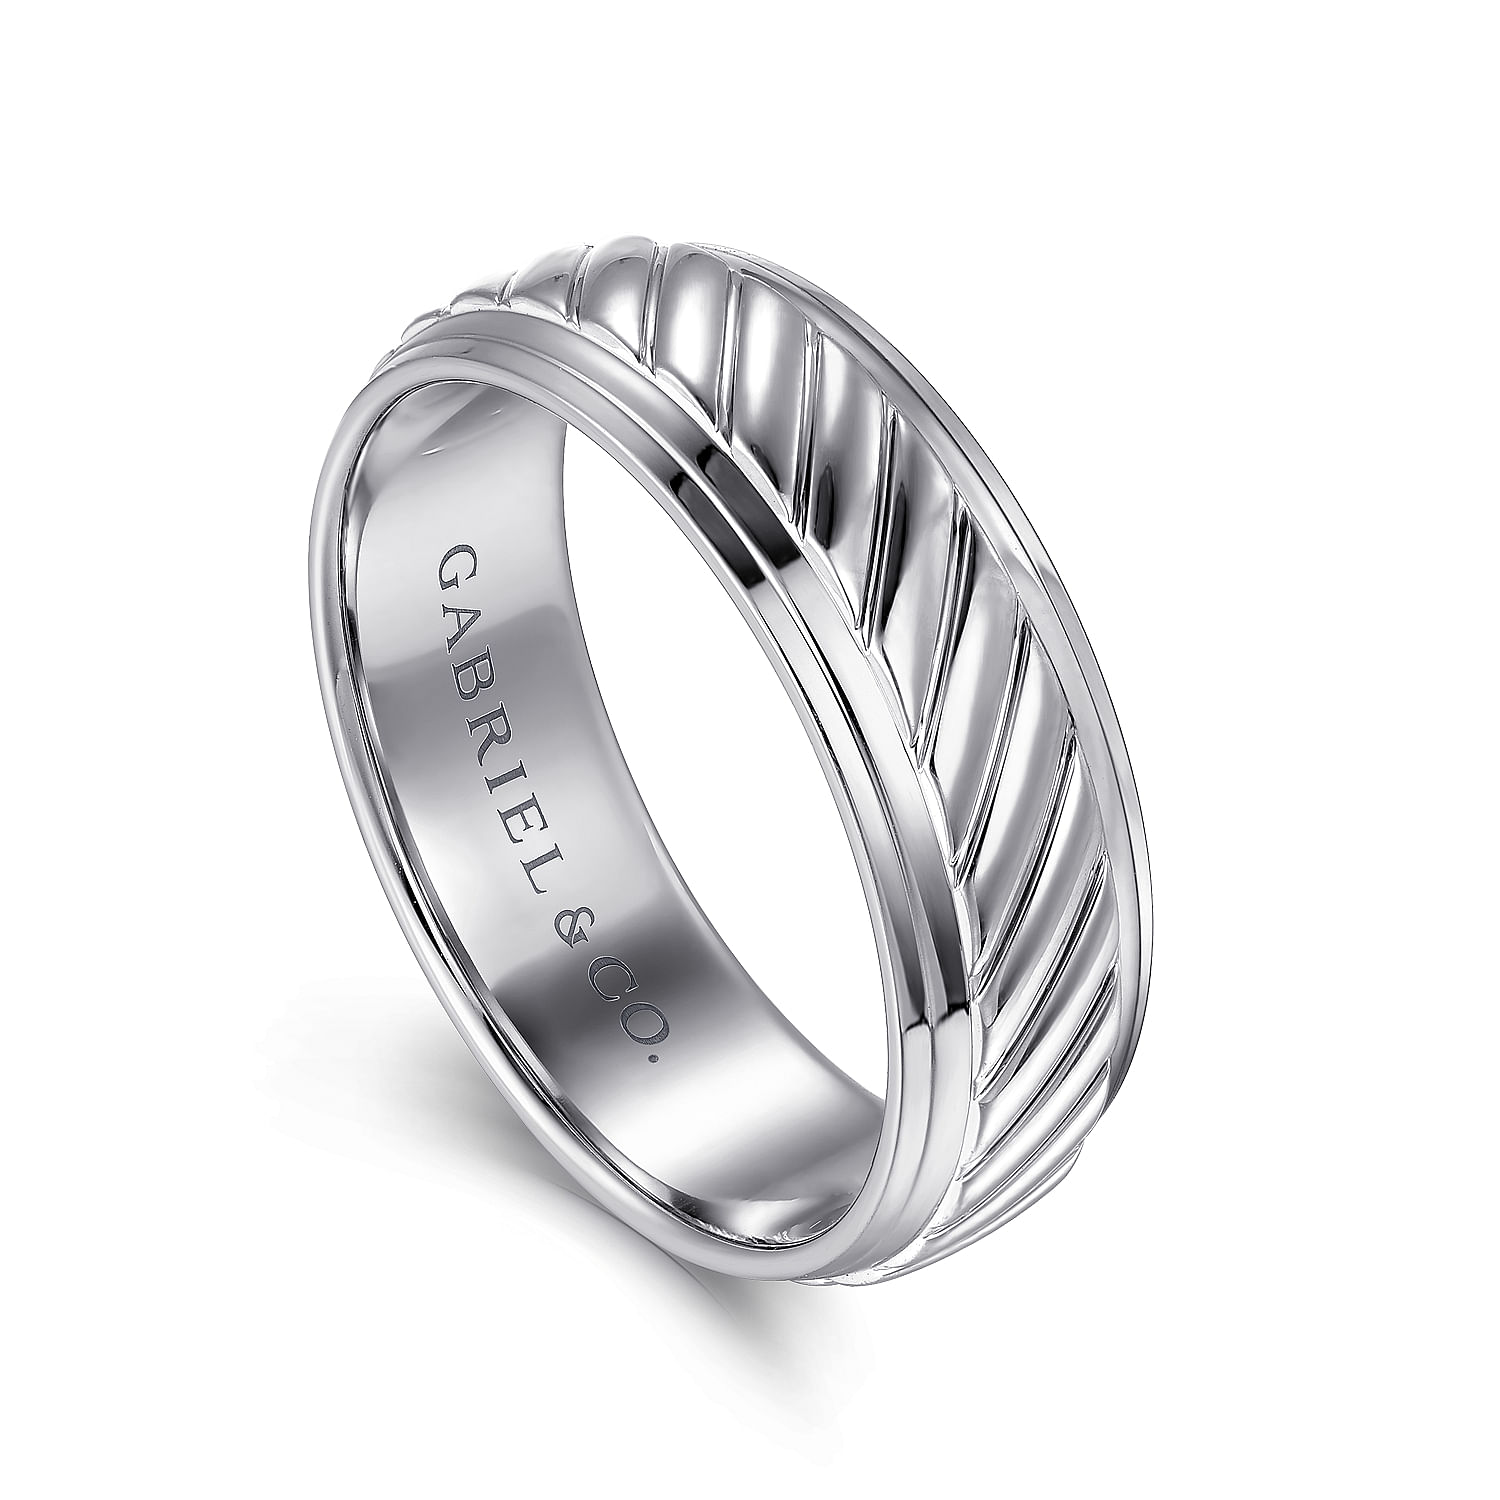 14K White Gold 7mm - Rope Center and Polished Edge Men's Wedding Band in High Polished Finish